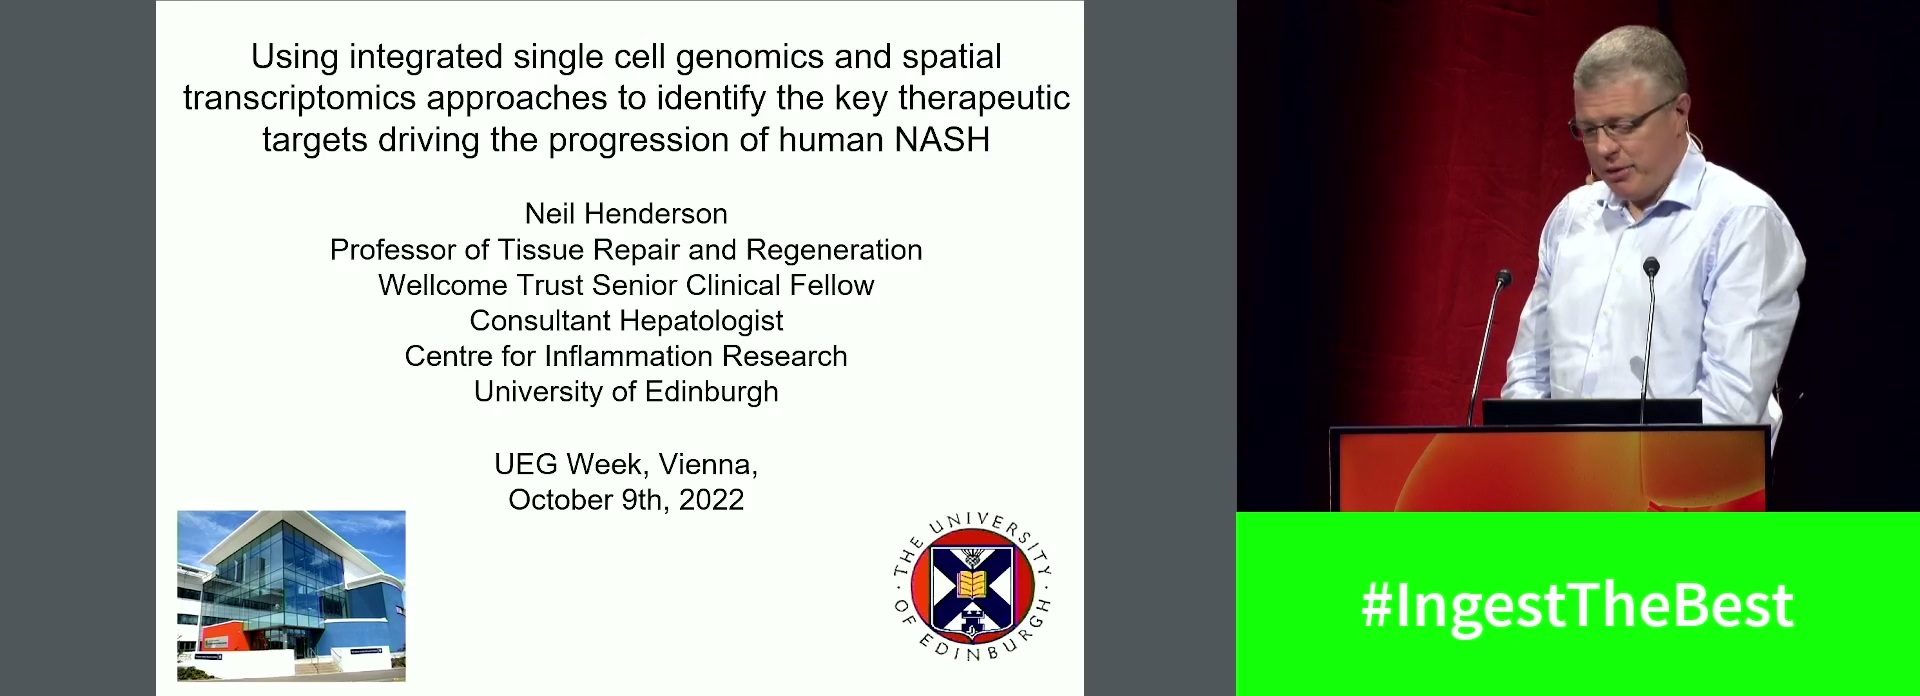 UEG Research Prize 2022: Using integrated single cell genomics and spatial transcriptomics approaches to identify the key therapeutic targets driving the progression of human NASH